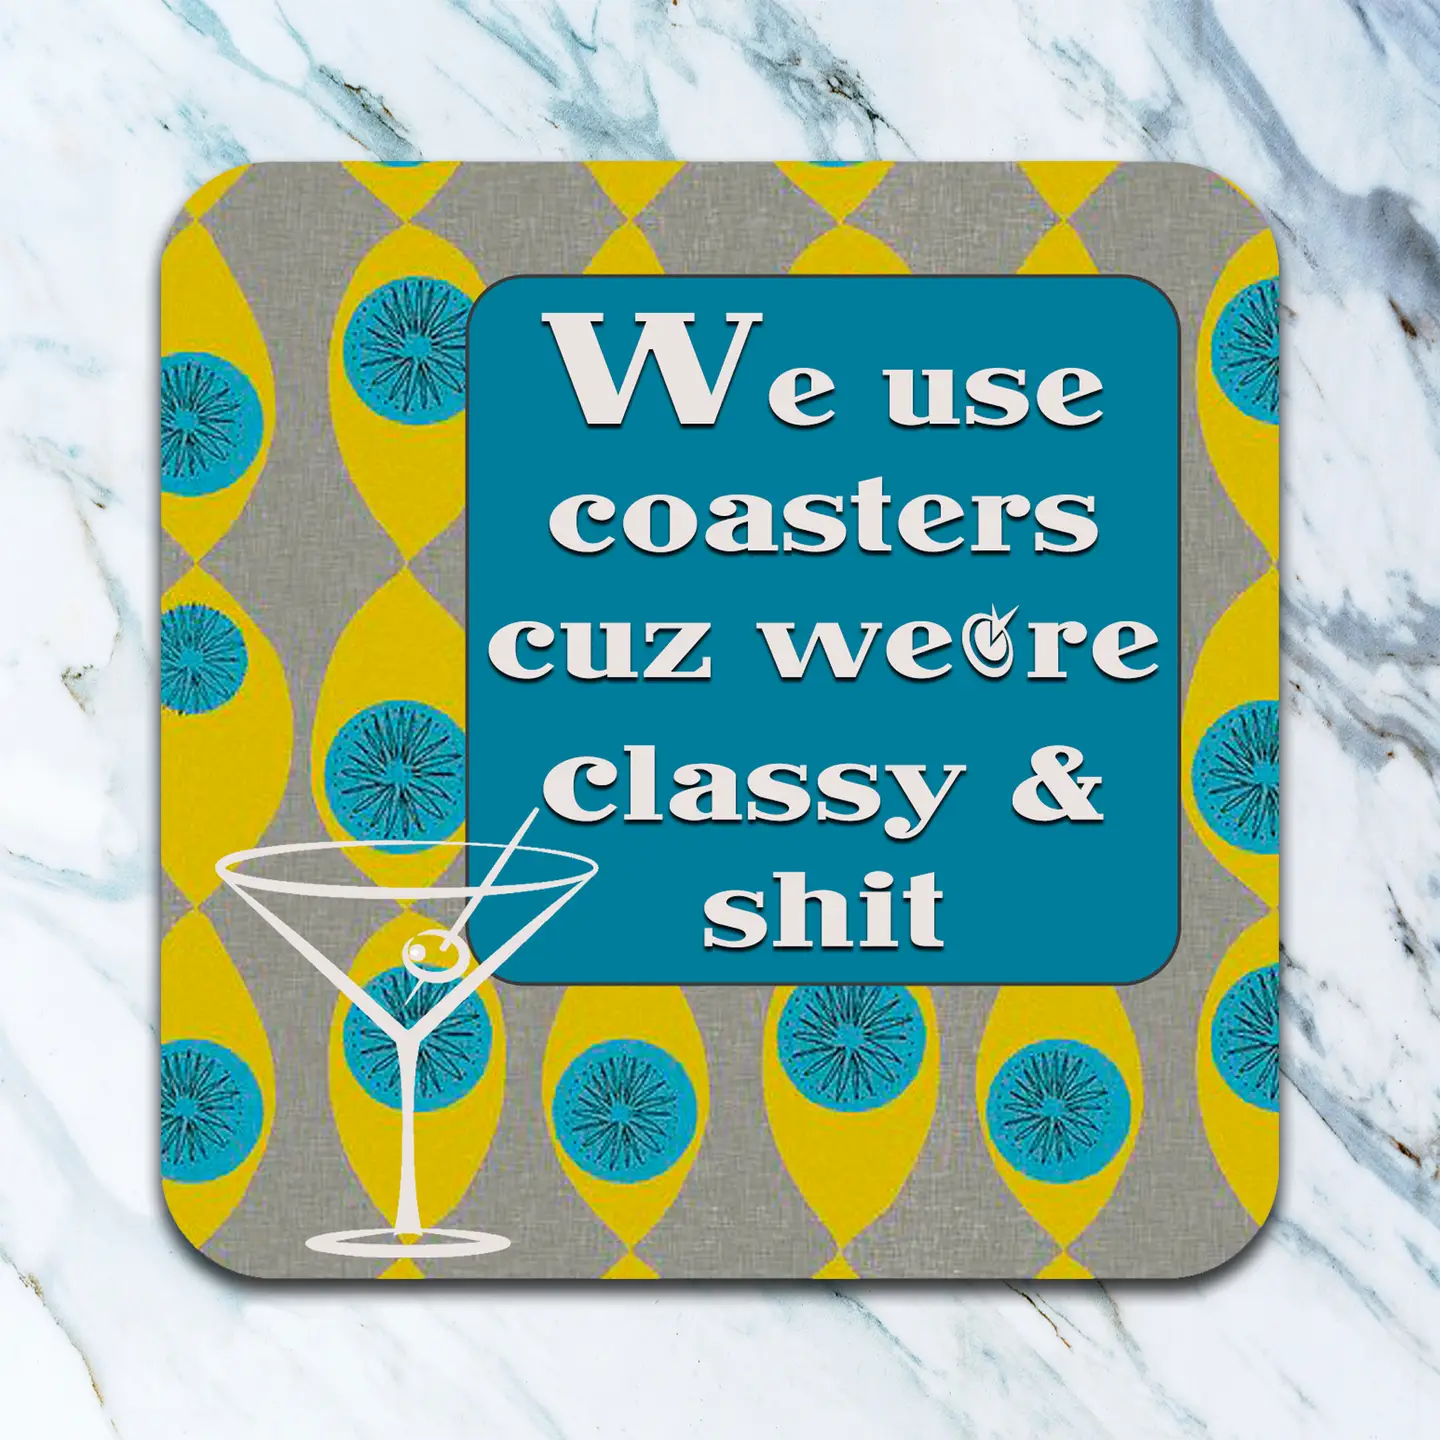 Our coasters are made in the USA from absorbent, neoprene-like material and measure 4" x 4". They are dishwasher safe and reusable (what a deal).